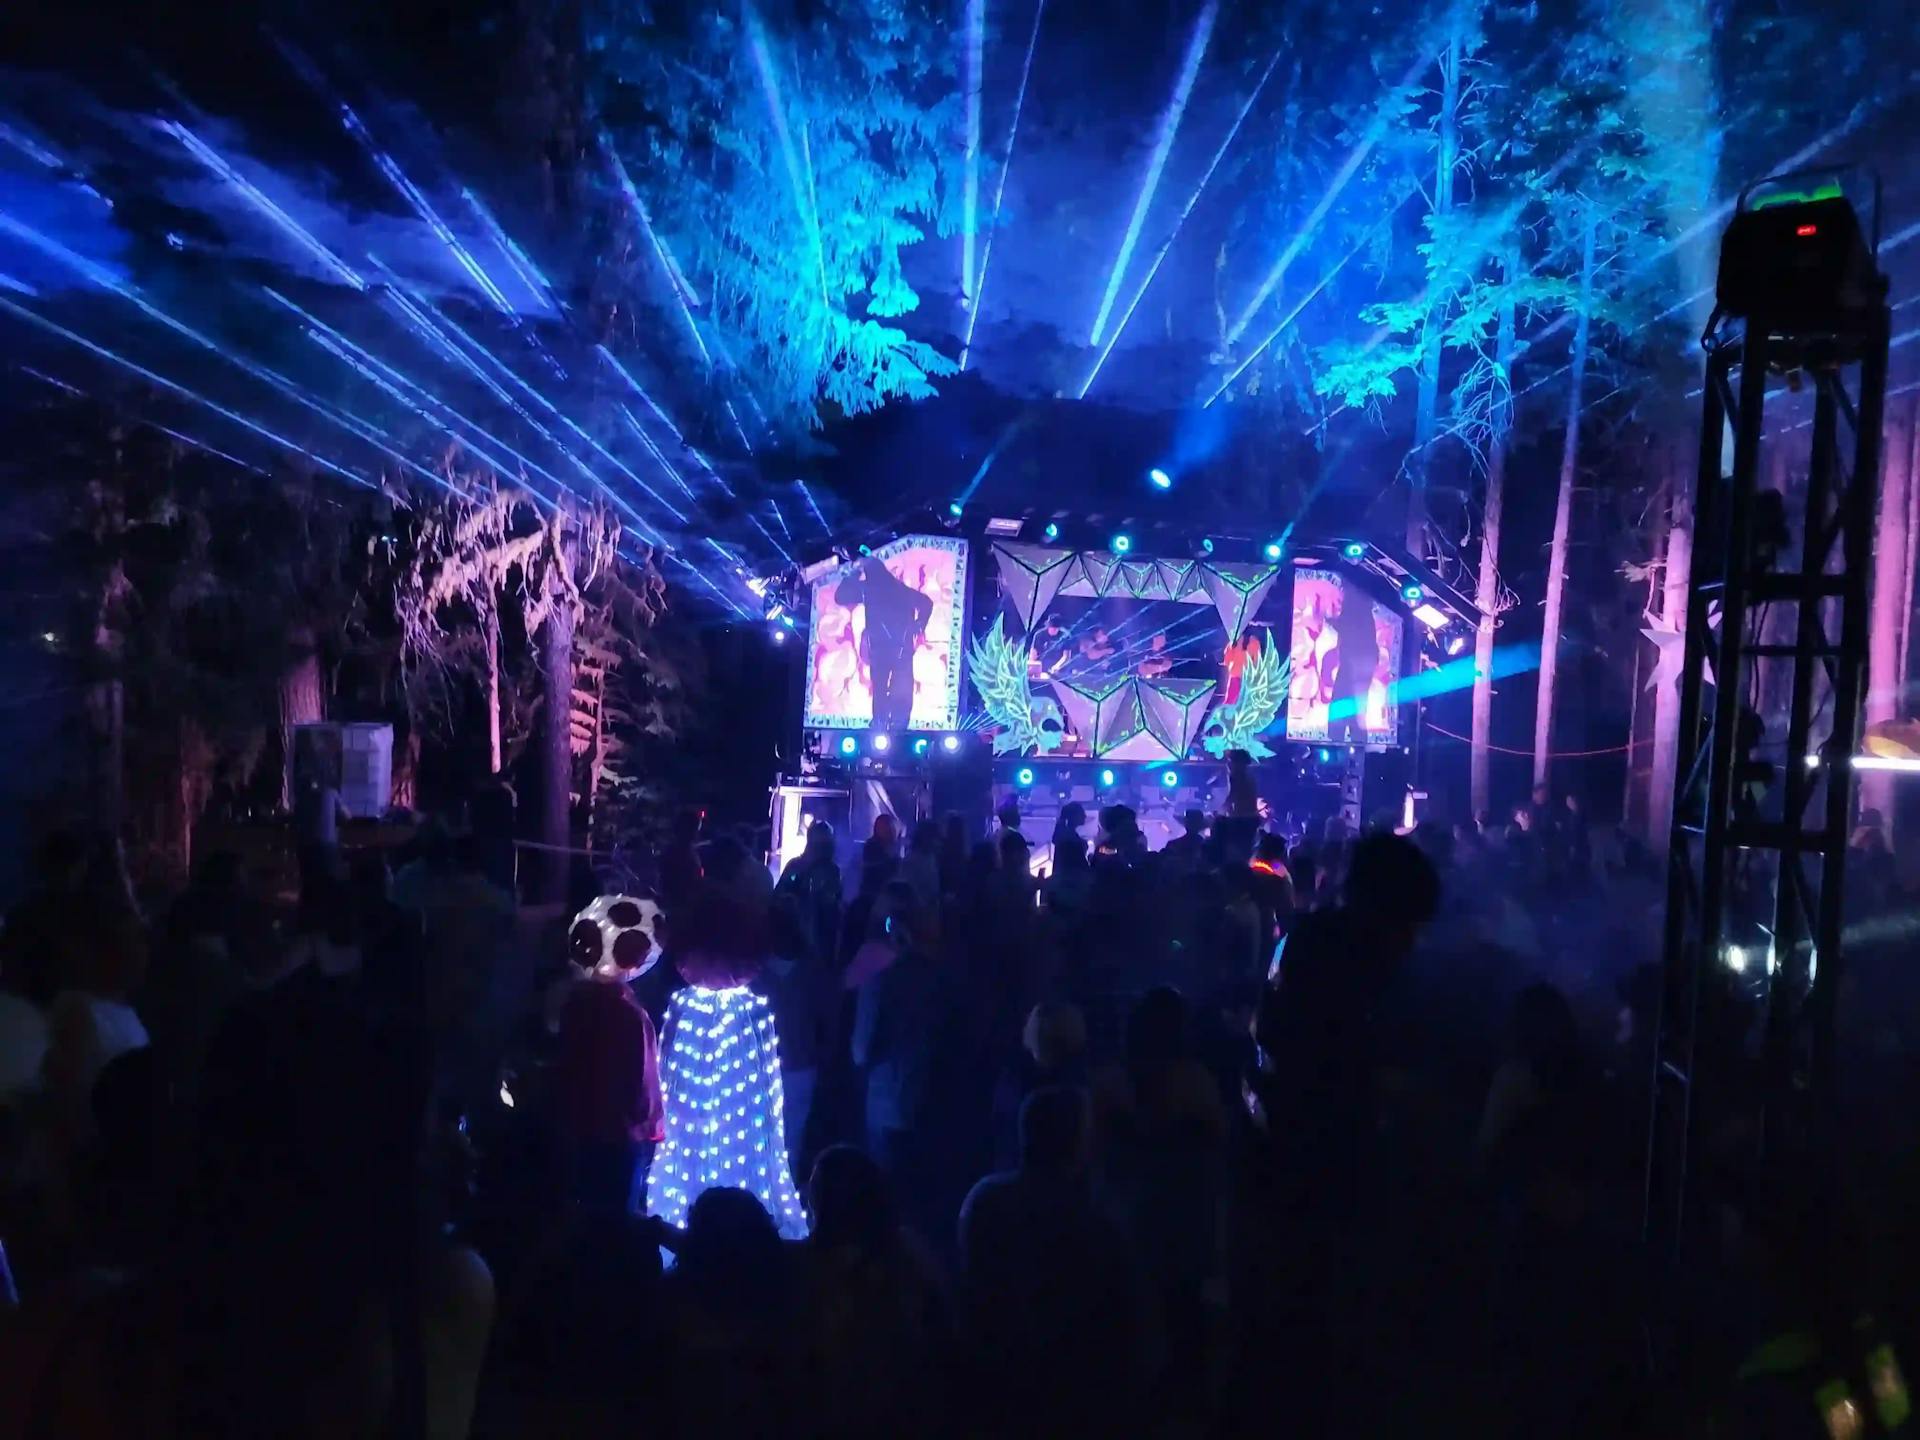 Asgard stage at night with dazzling light shows, lasers, and crowds enjoying the music.